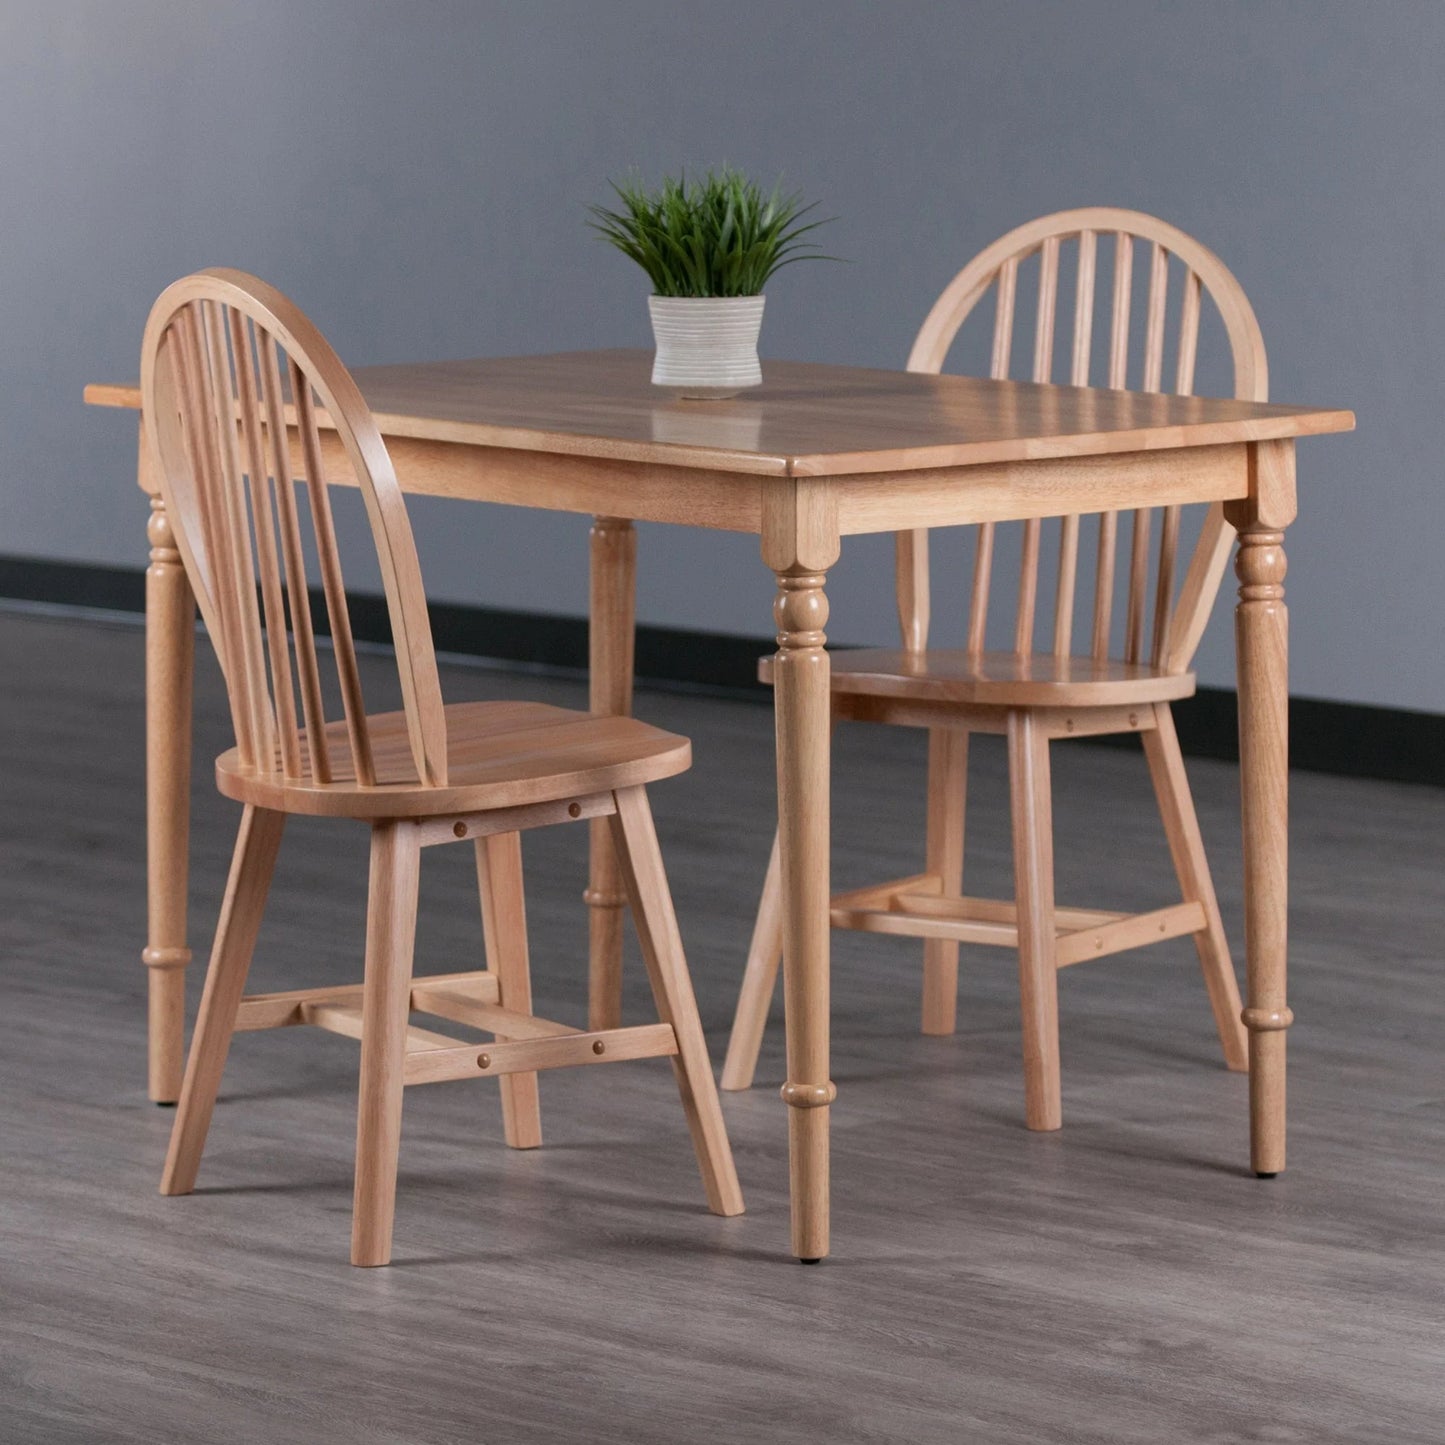 WINSOME Pub Table Set Ravenna 3-Pc Dining Table with Windsor Chairs, Natural